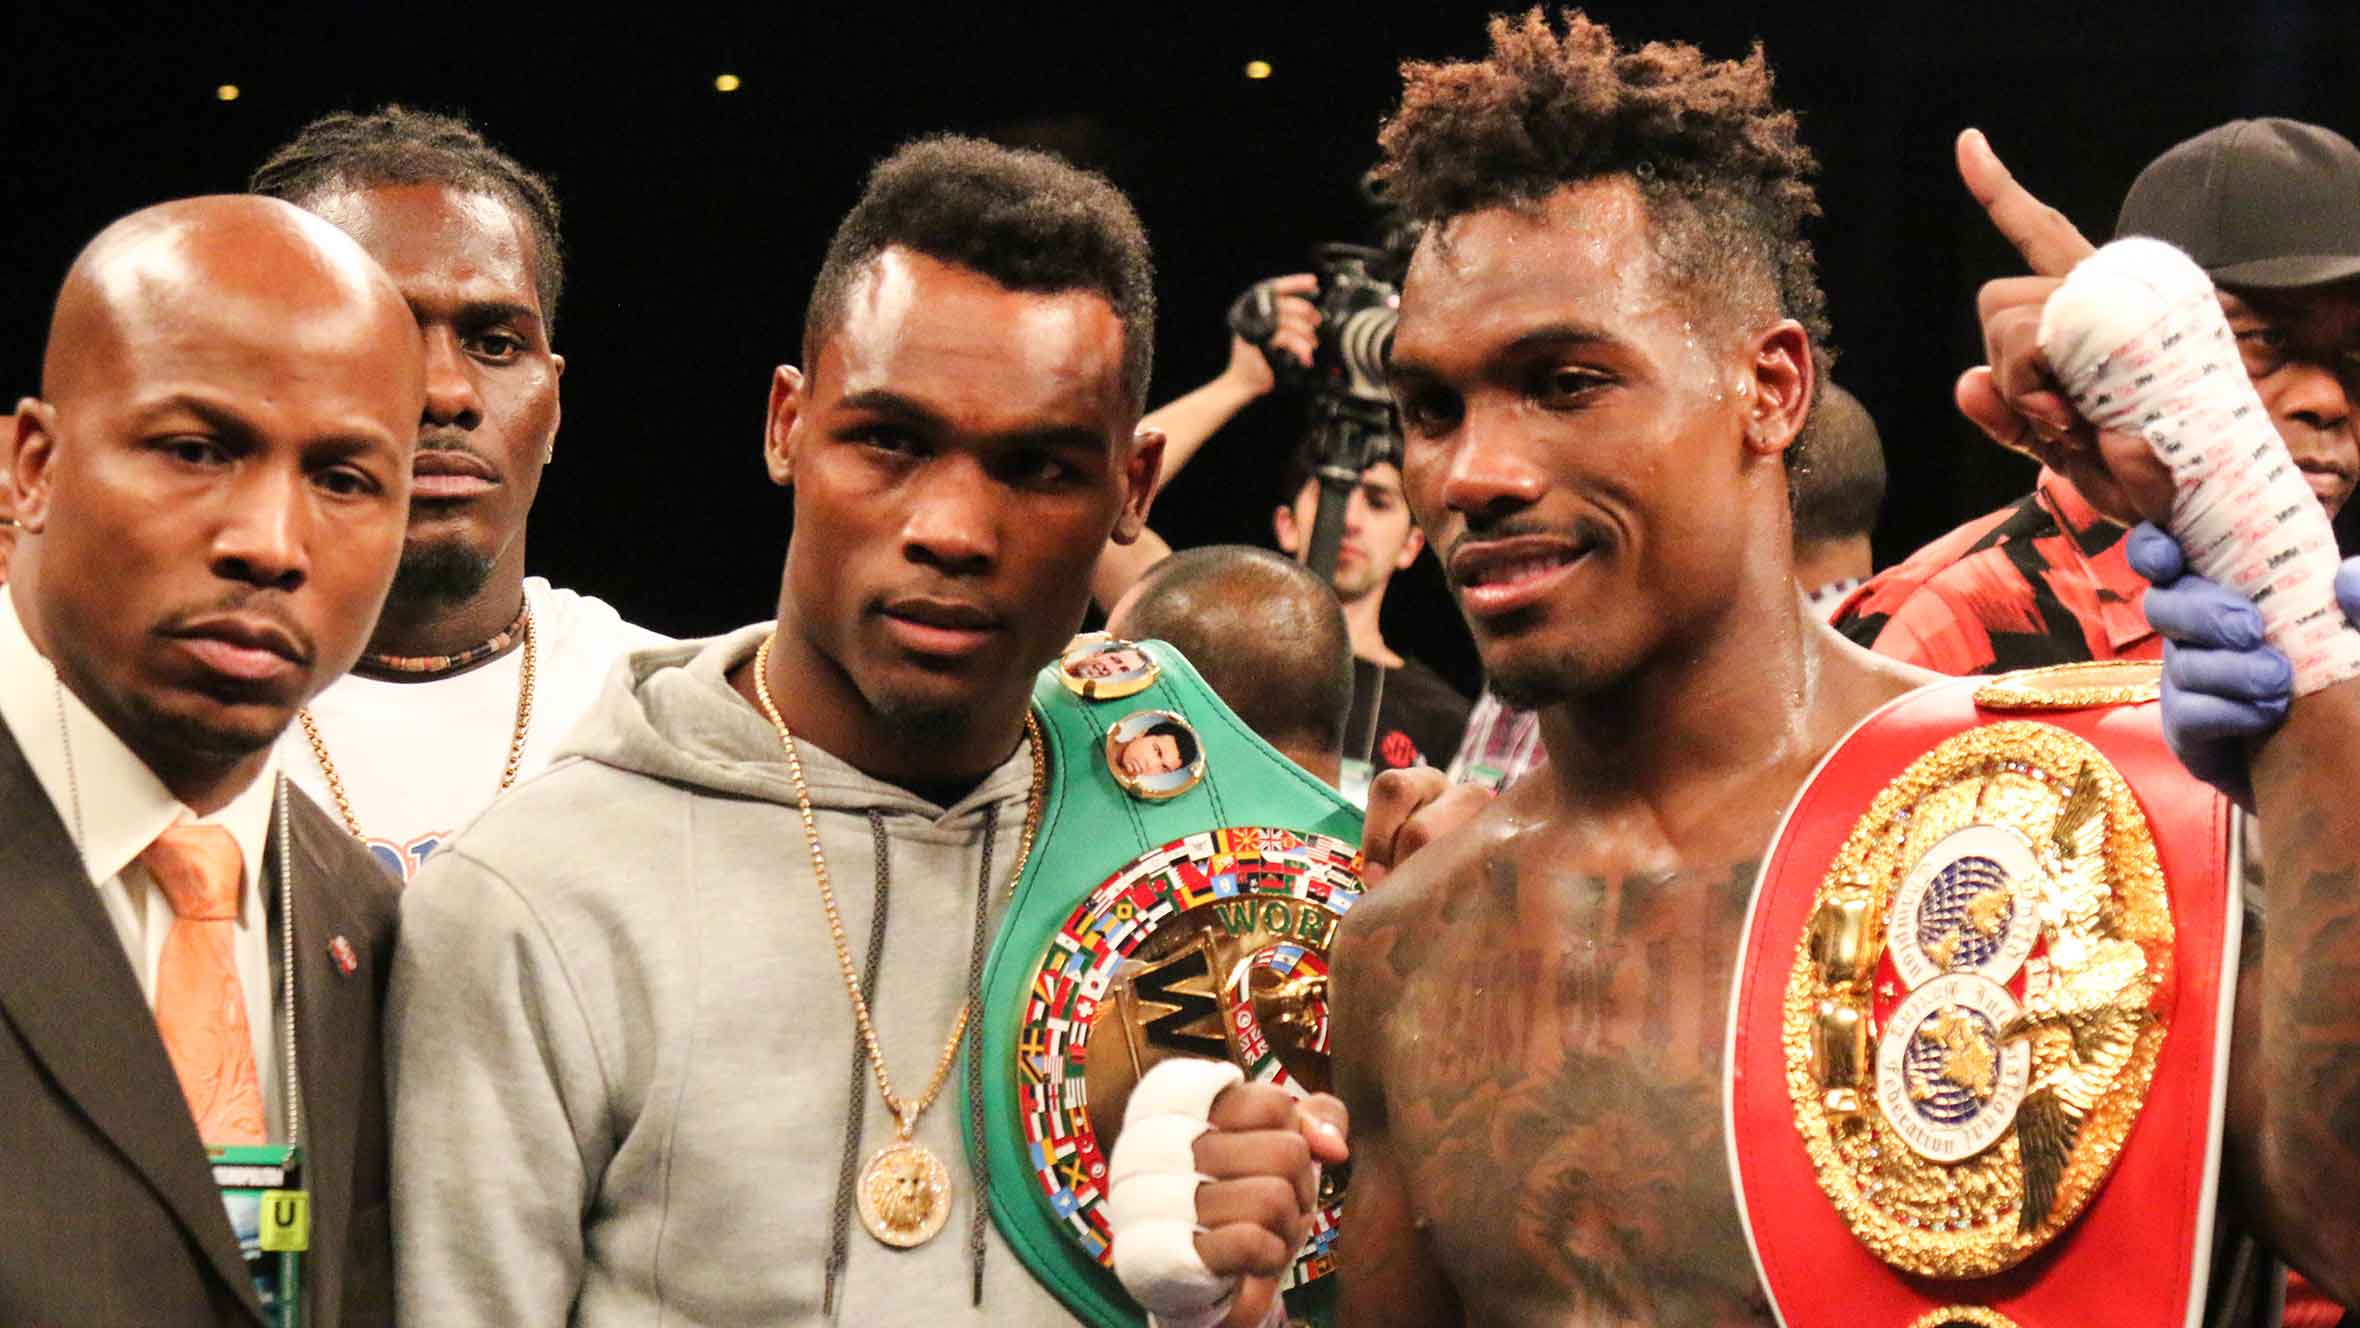 The fight continues for world champion Charlo twins even after they leave the ring